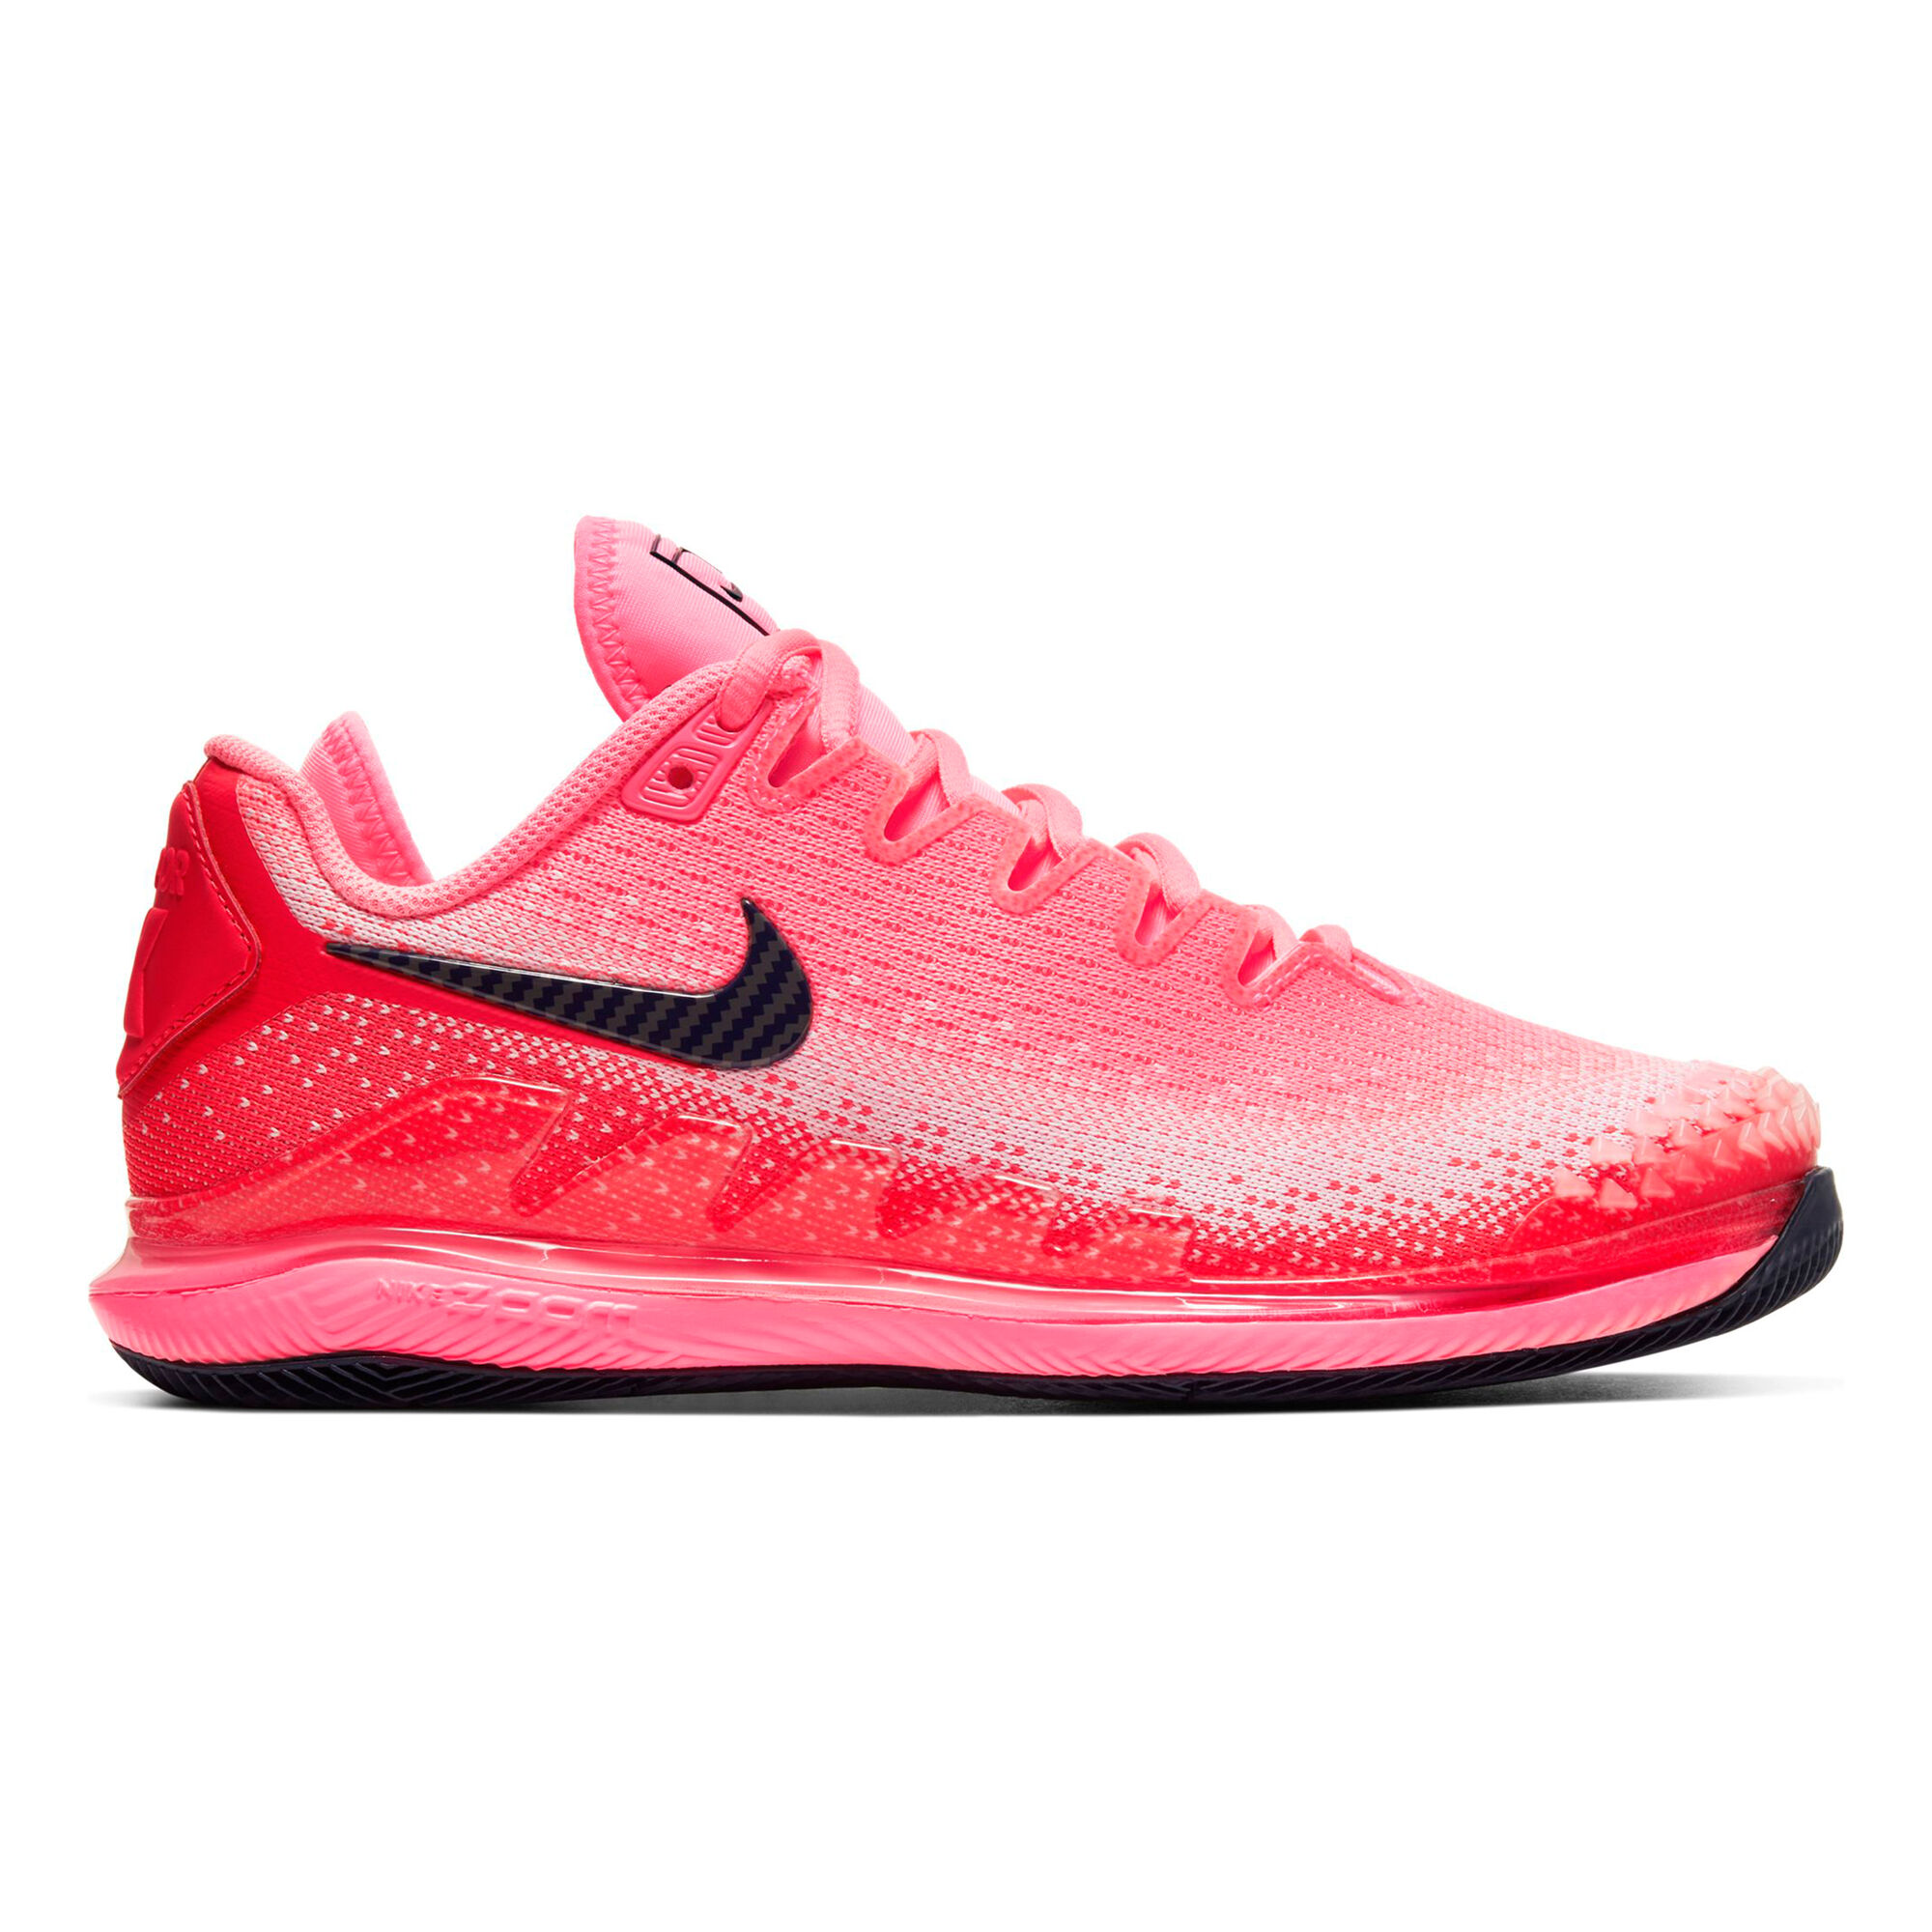 Buy Nike Air Zoom Vapor X Knit All Court Shoe Women Neon Red, Pink ...